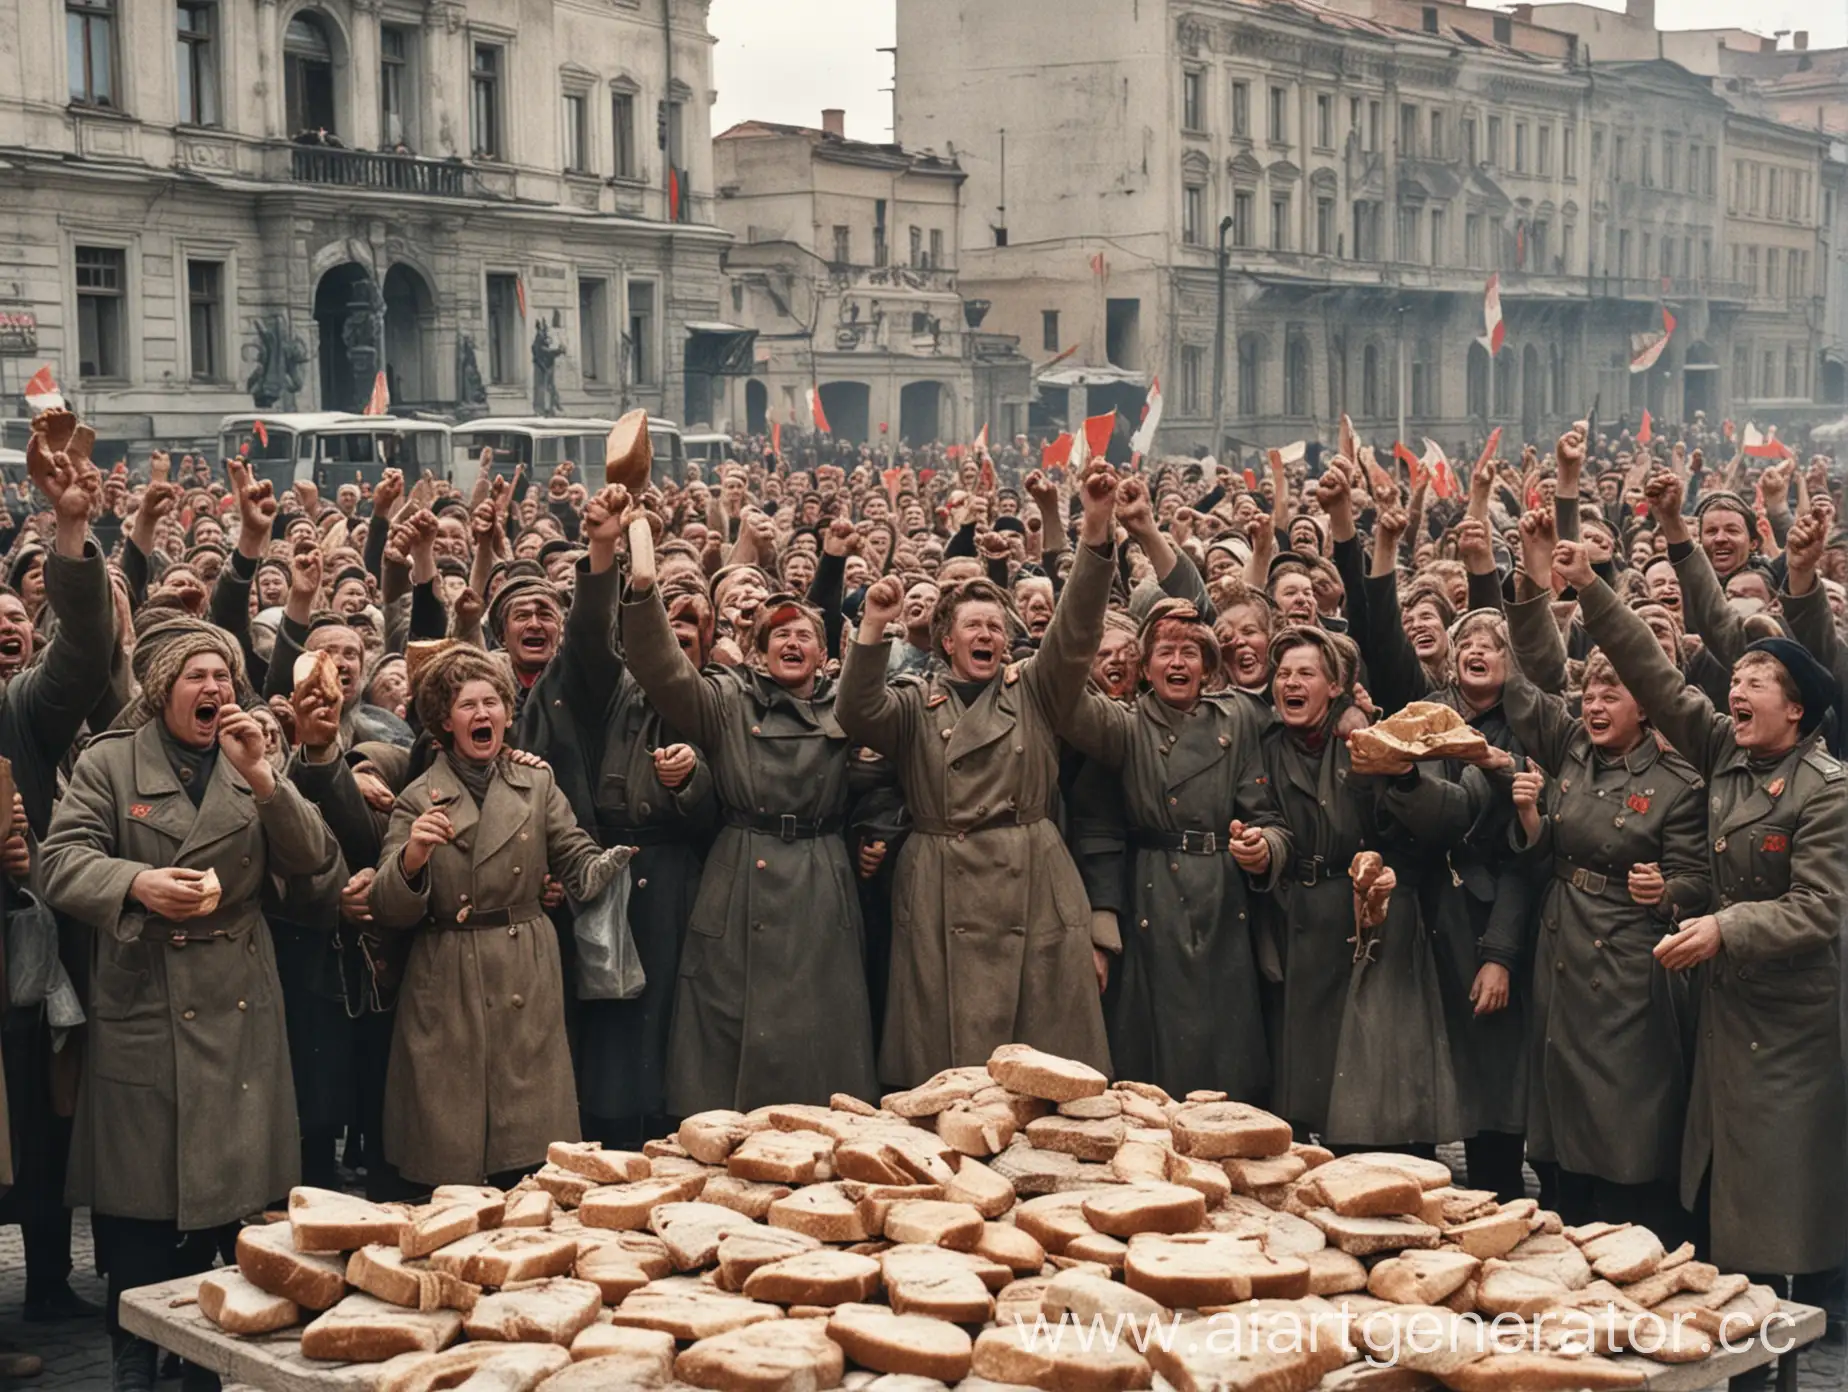 Soviet-People-Celebrating-Victory-Over-Hunger-Bread-Abundance-in-the-Square